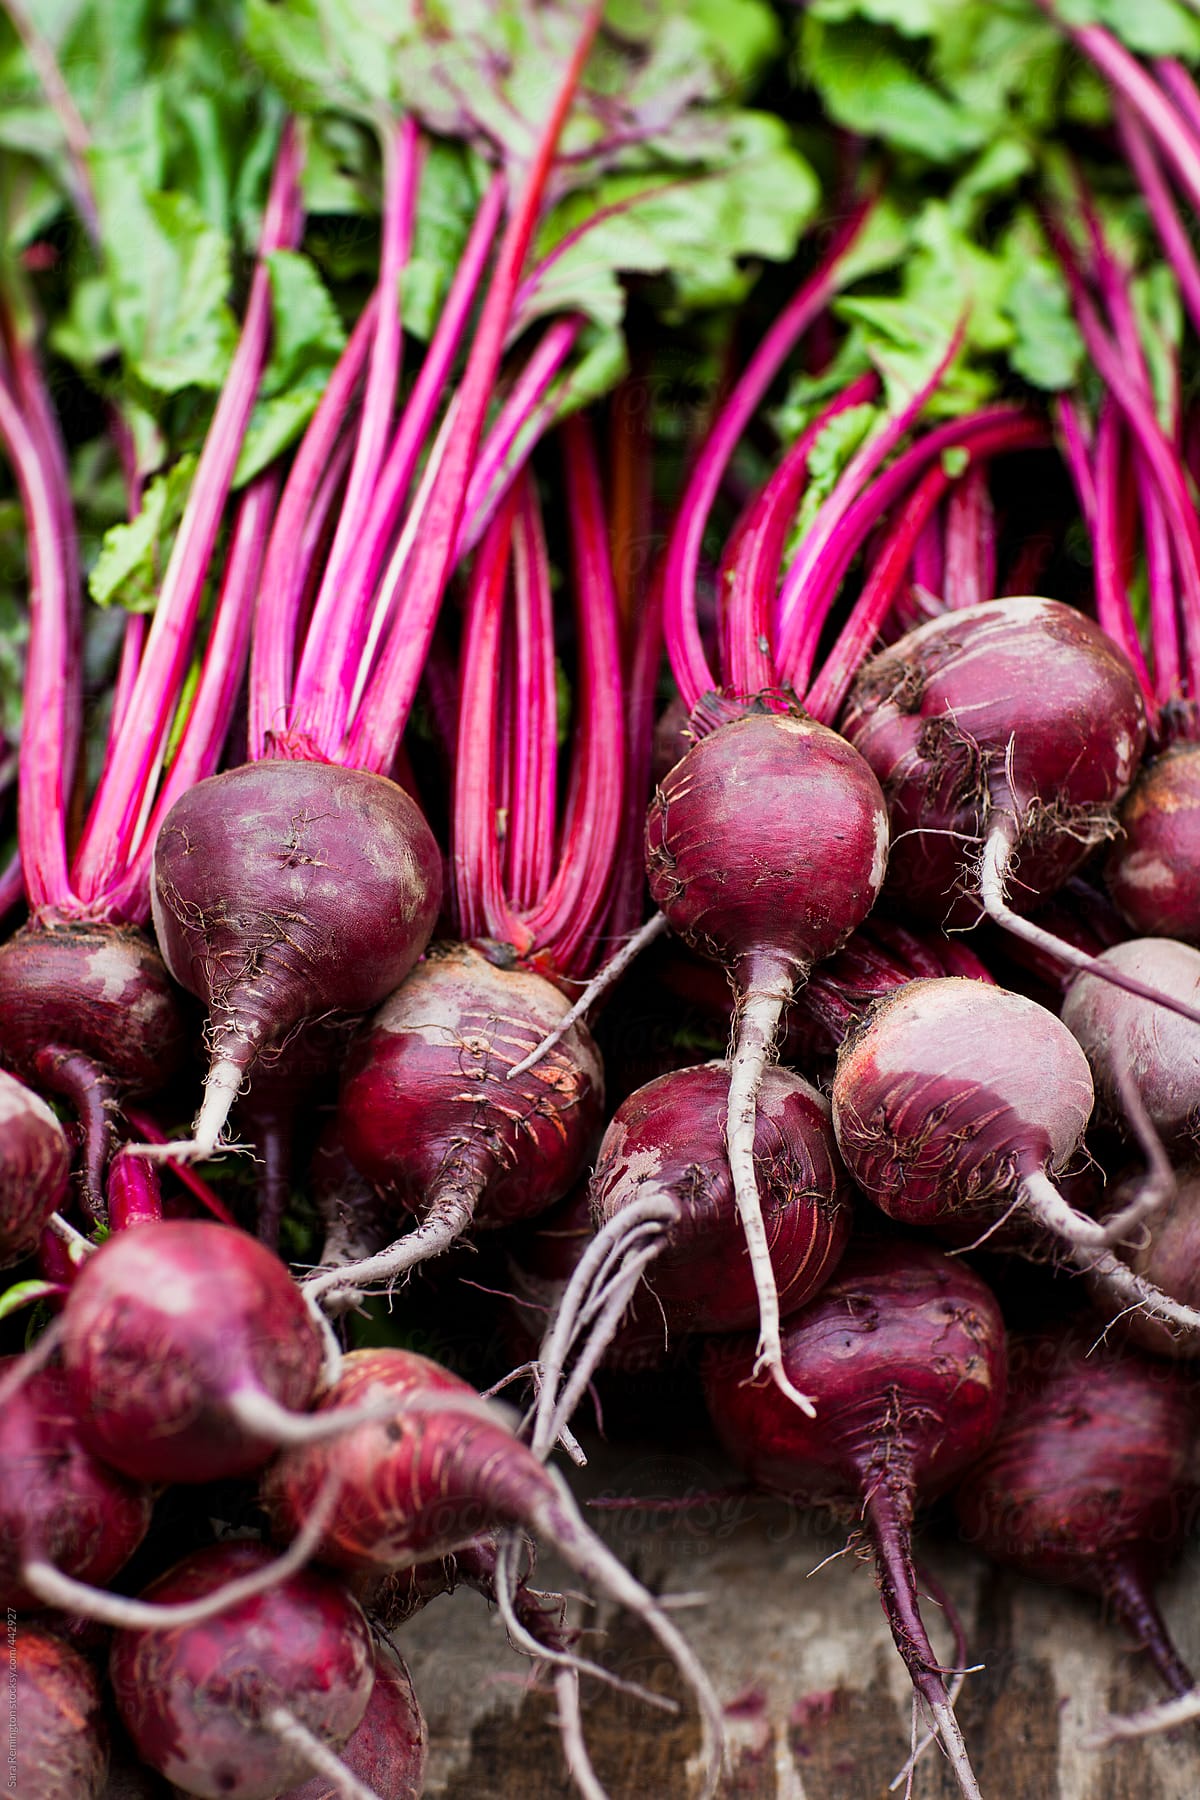 Red Beets at Farmer's Market